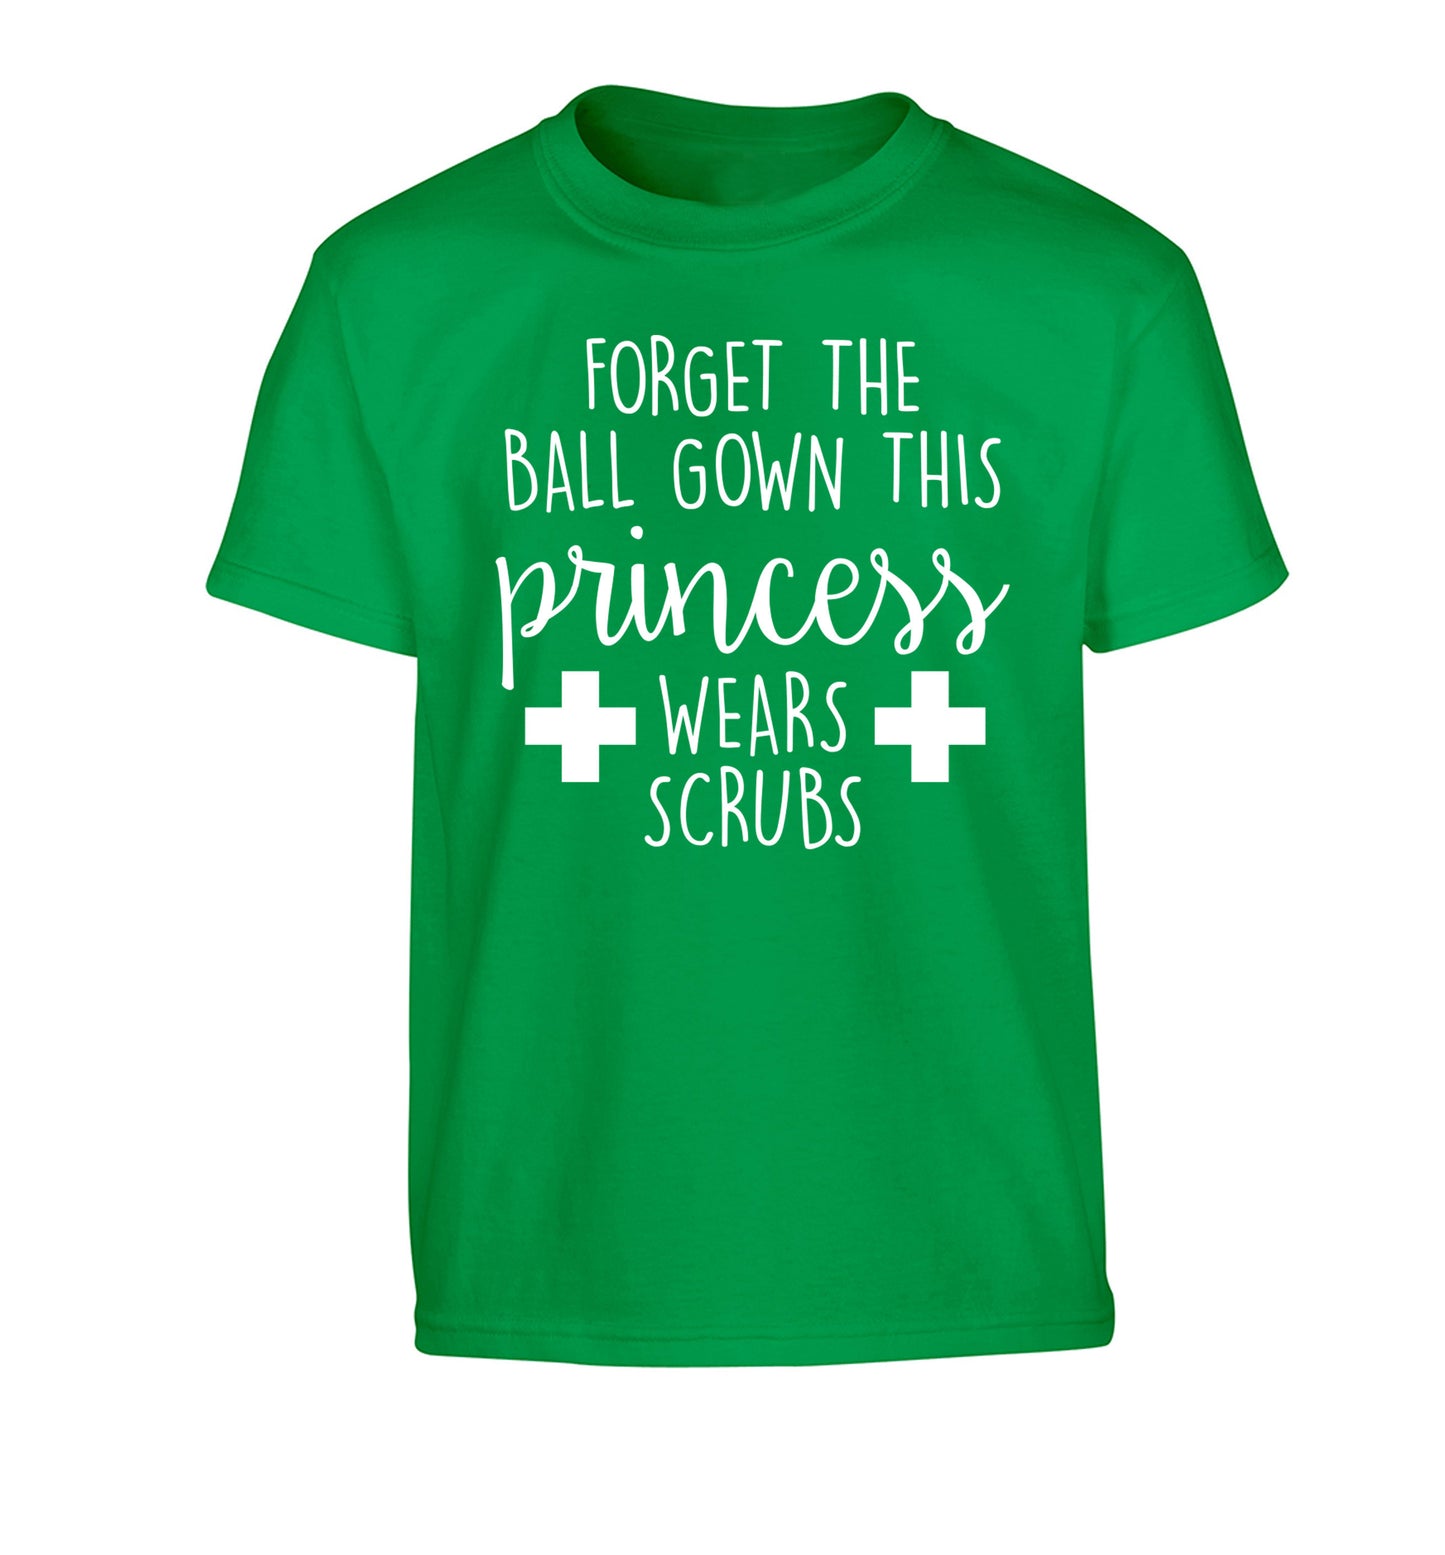 Forget the ball gown this princess wears scrubs Children's green Tshirt 12-14 Years